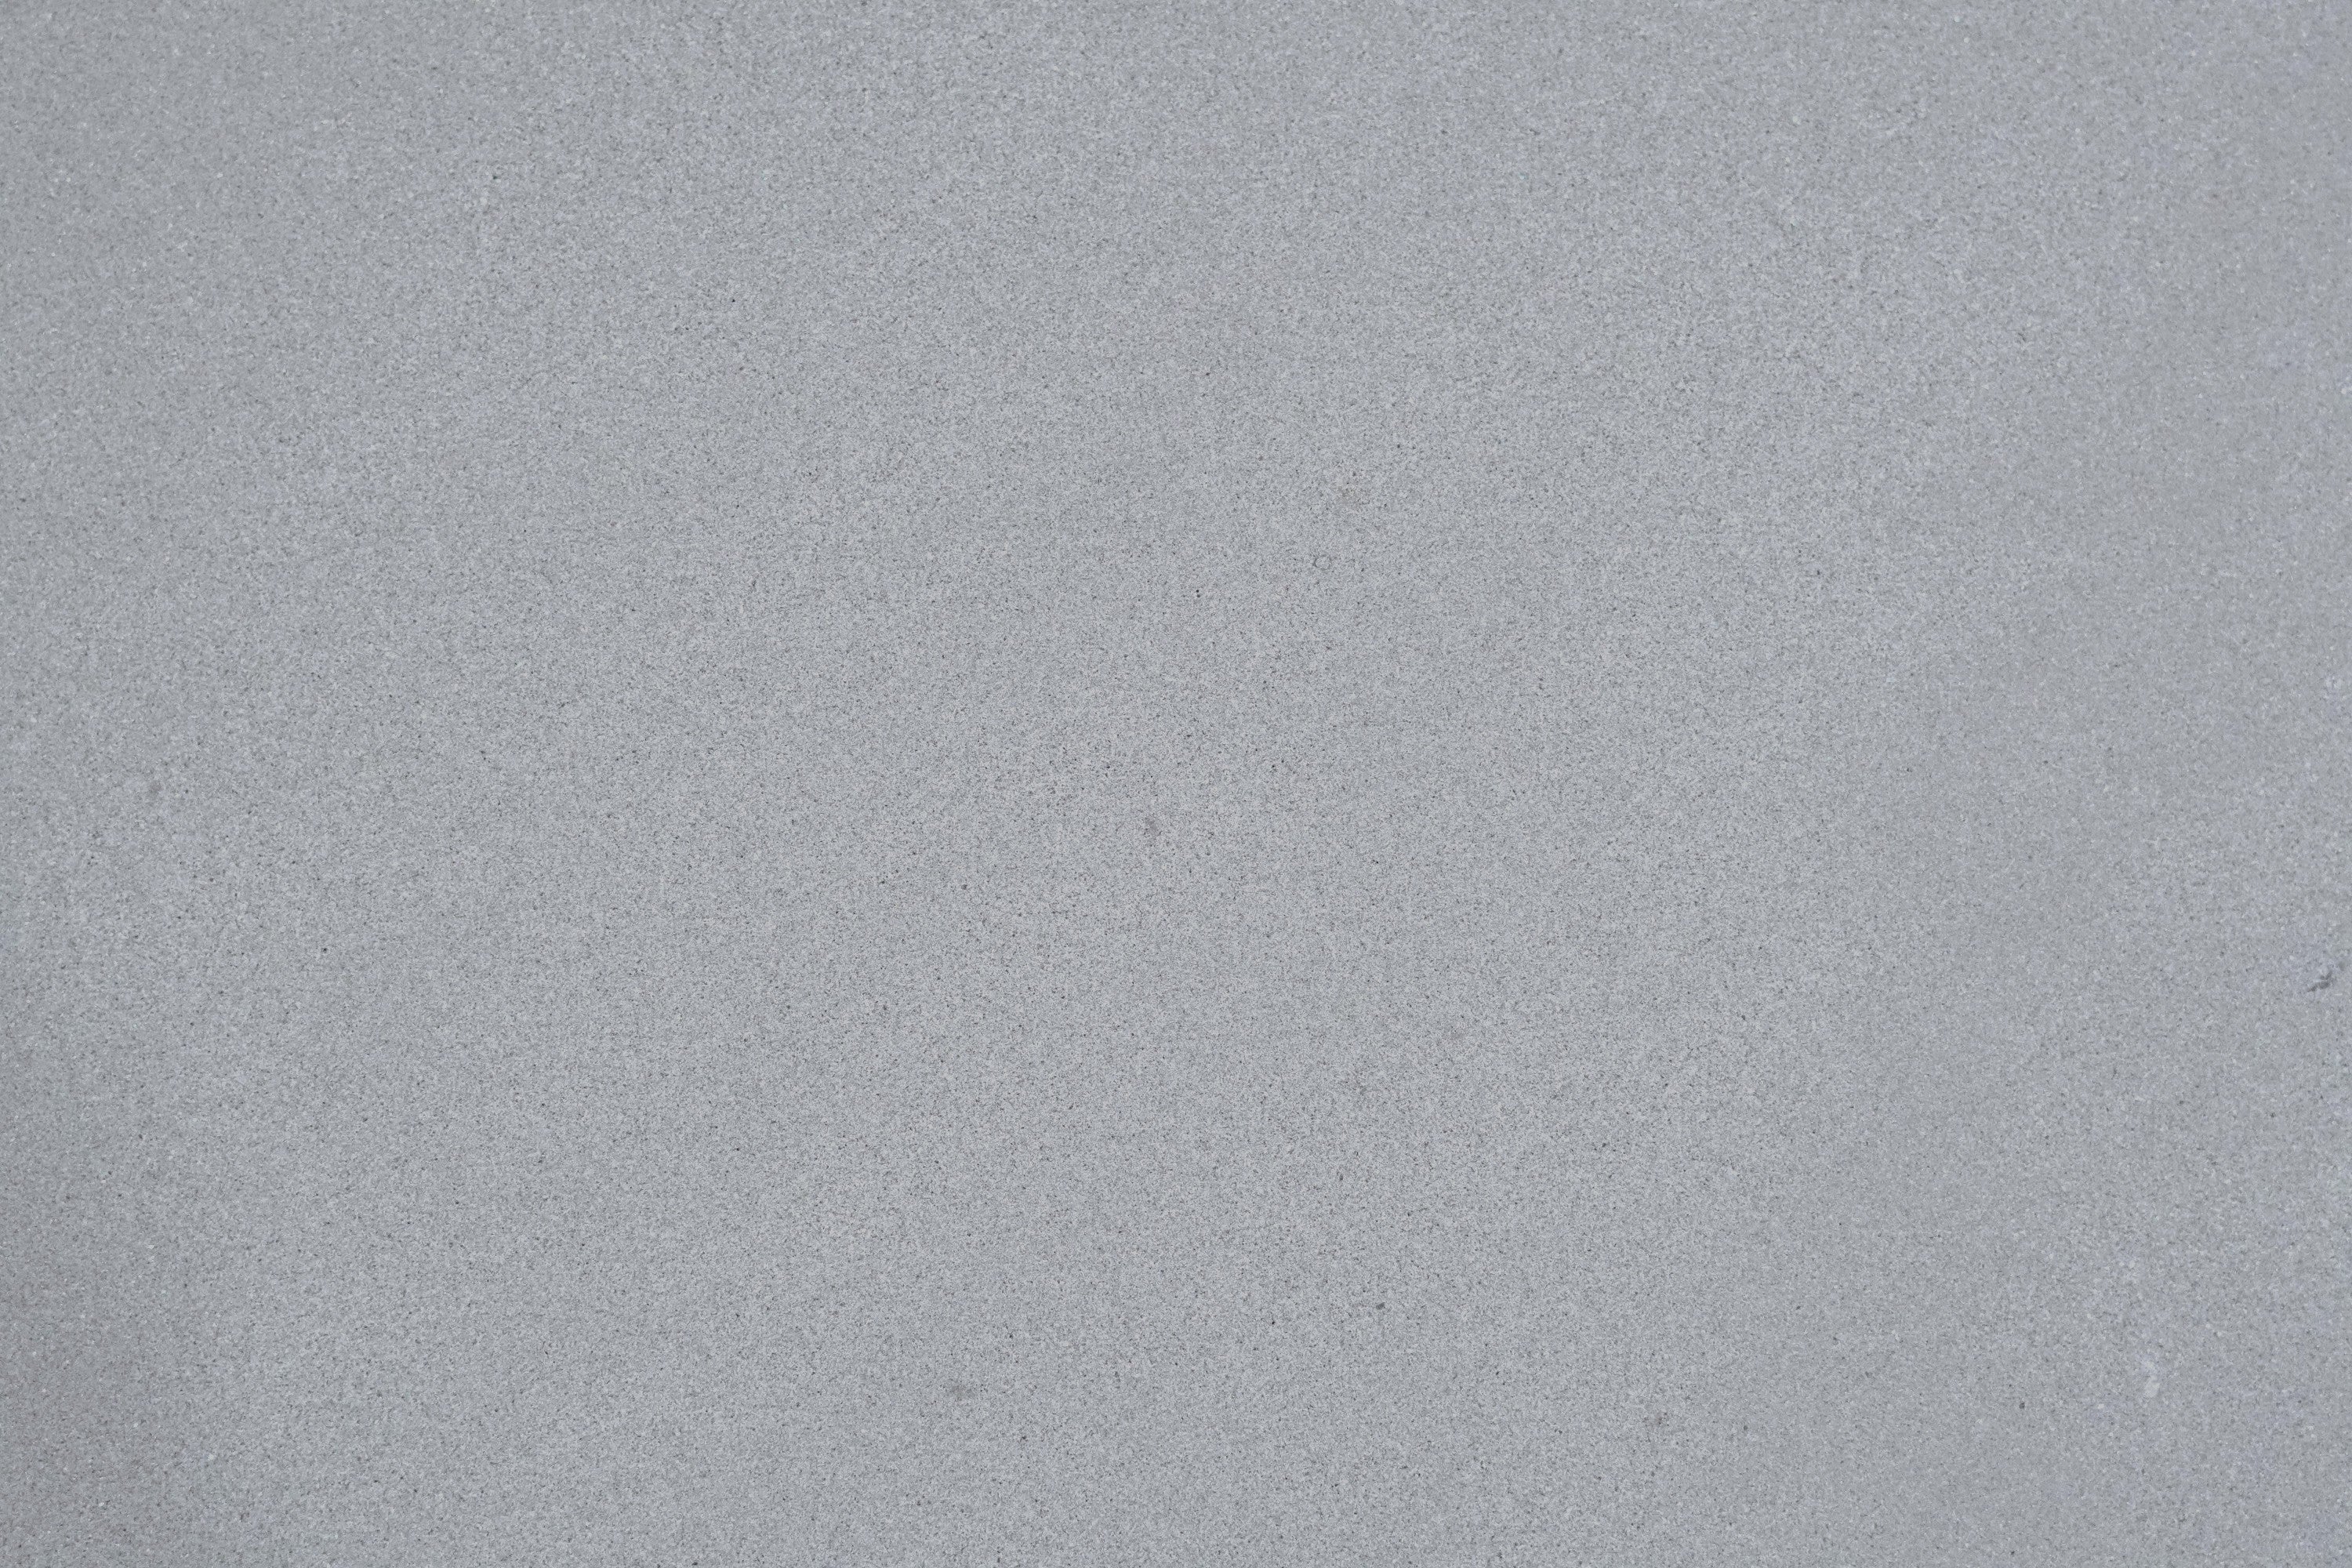 gray silk natural limestone field tile pietra serena width of 16 length of 32 and thickness of 0.75 sold to you by surface group international